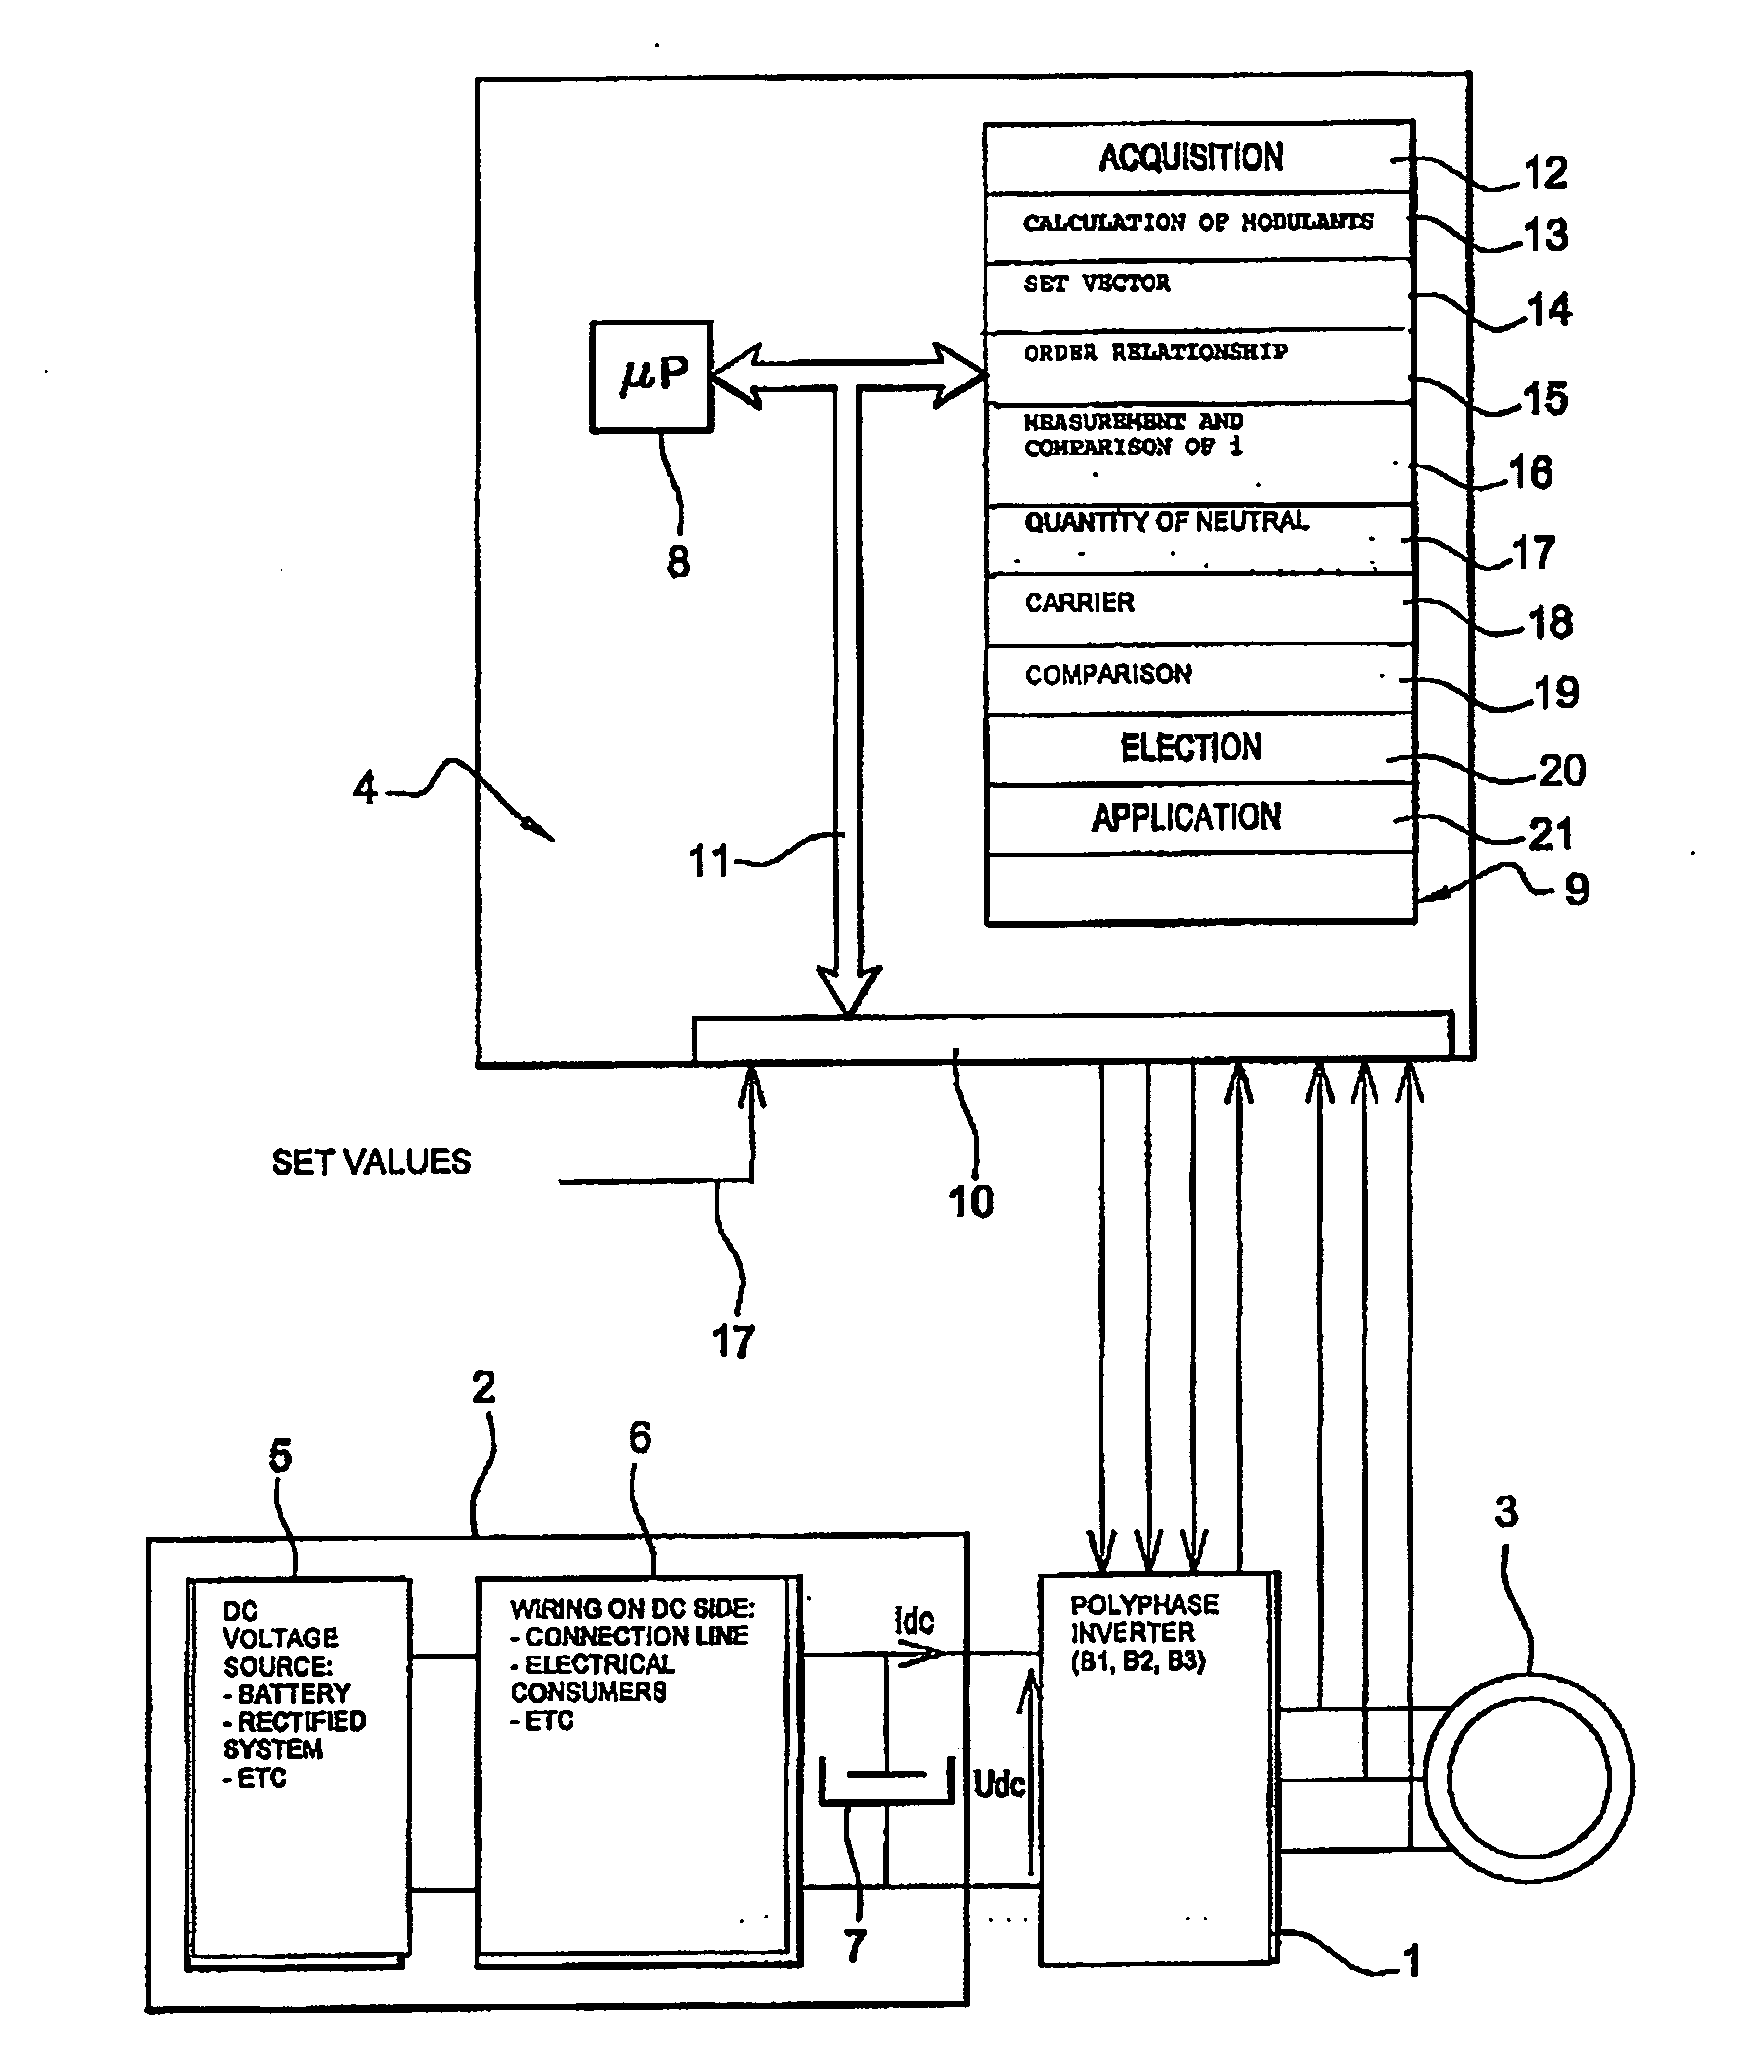 Method for controlling a polyphase voltage inverter